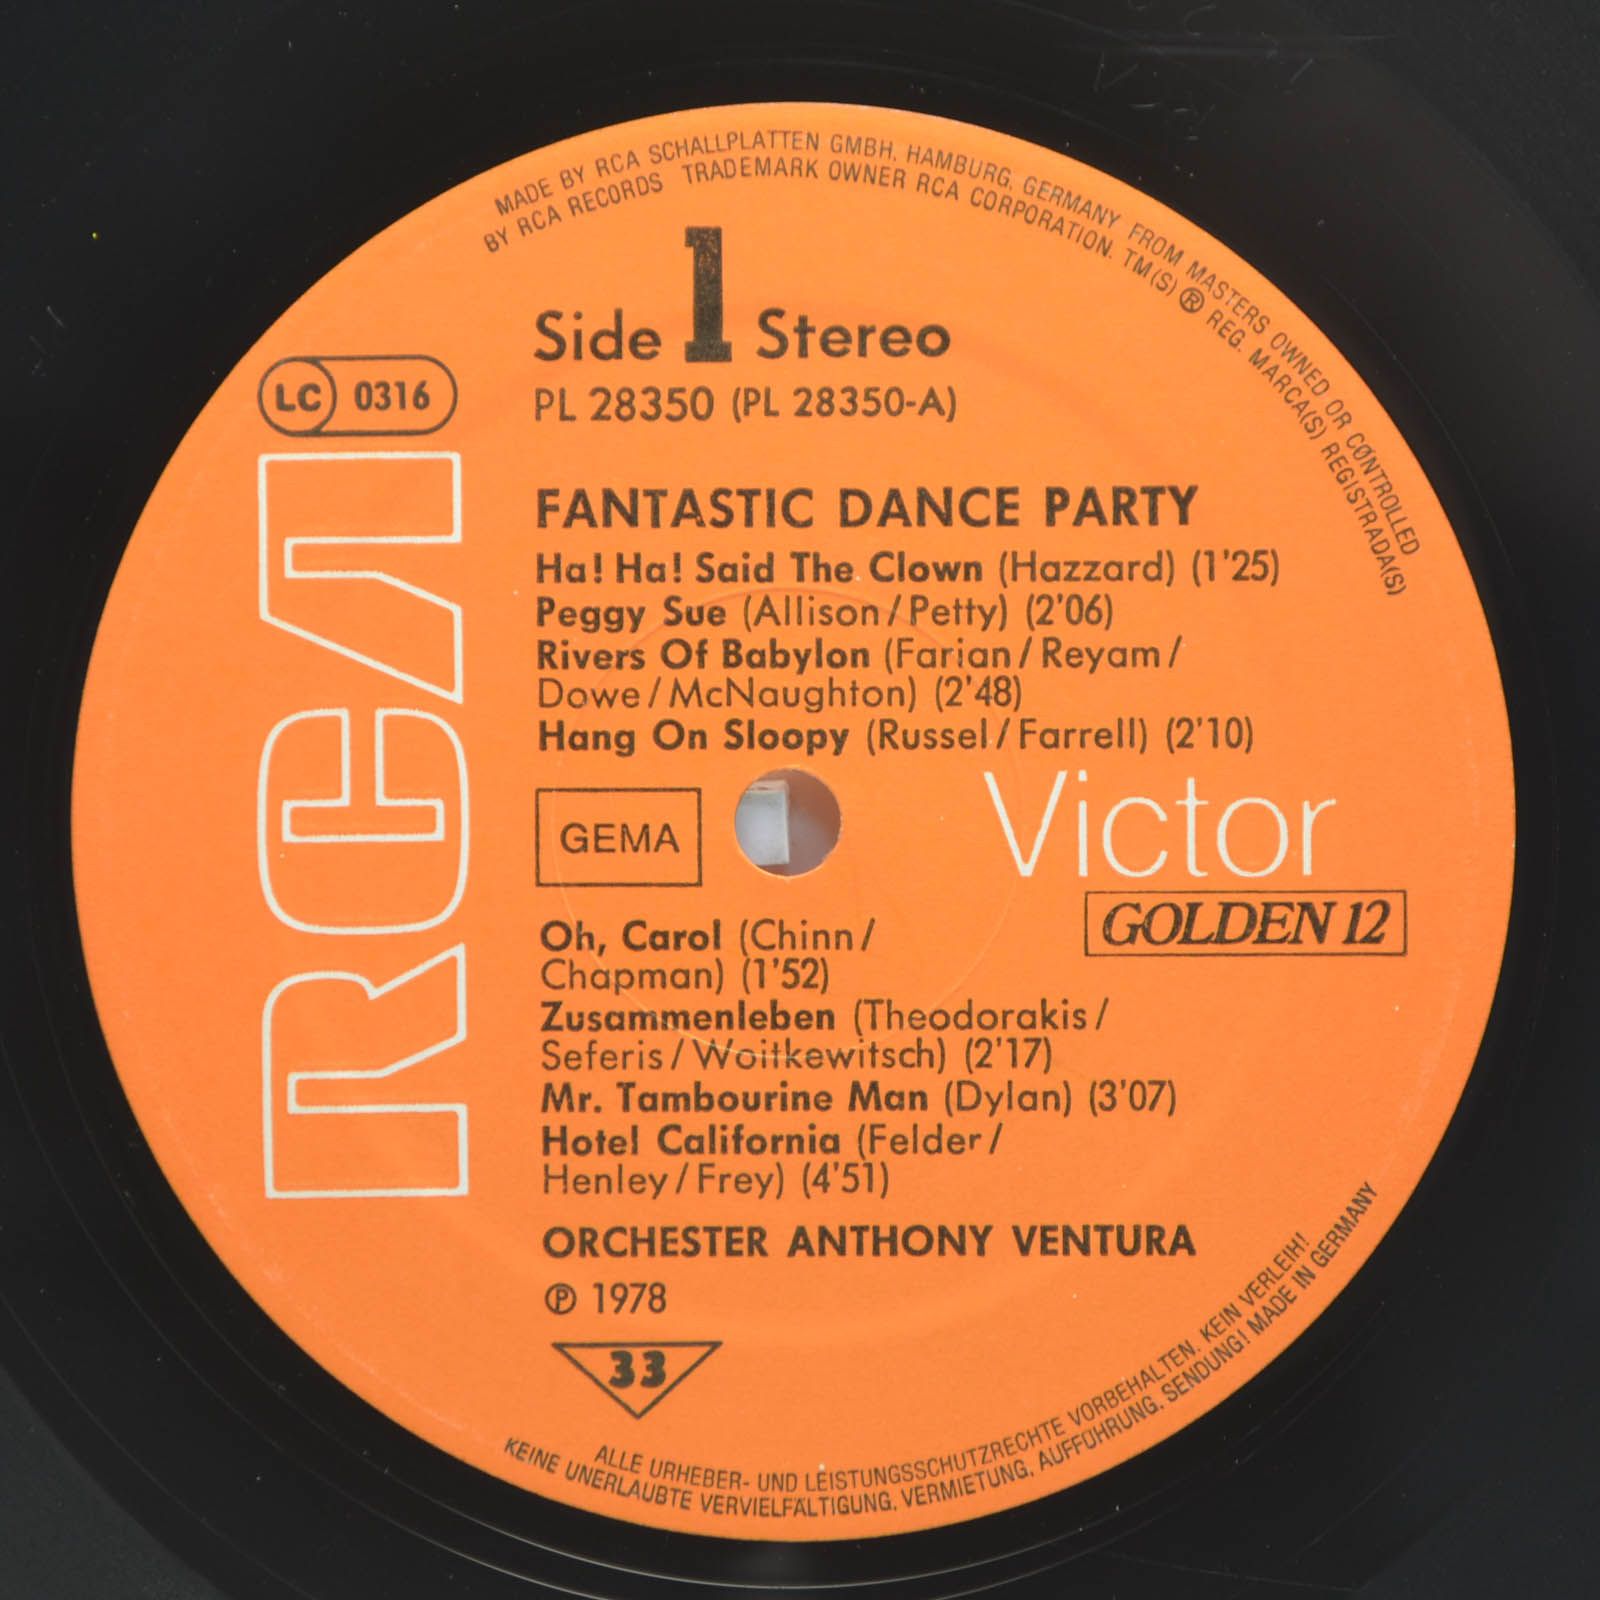 Orchester Anthony Ventura — Fantastic Dance Party, 1979